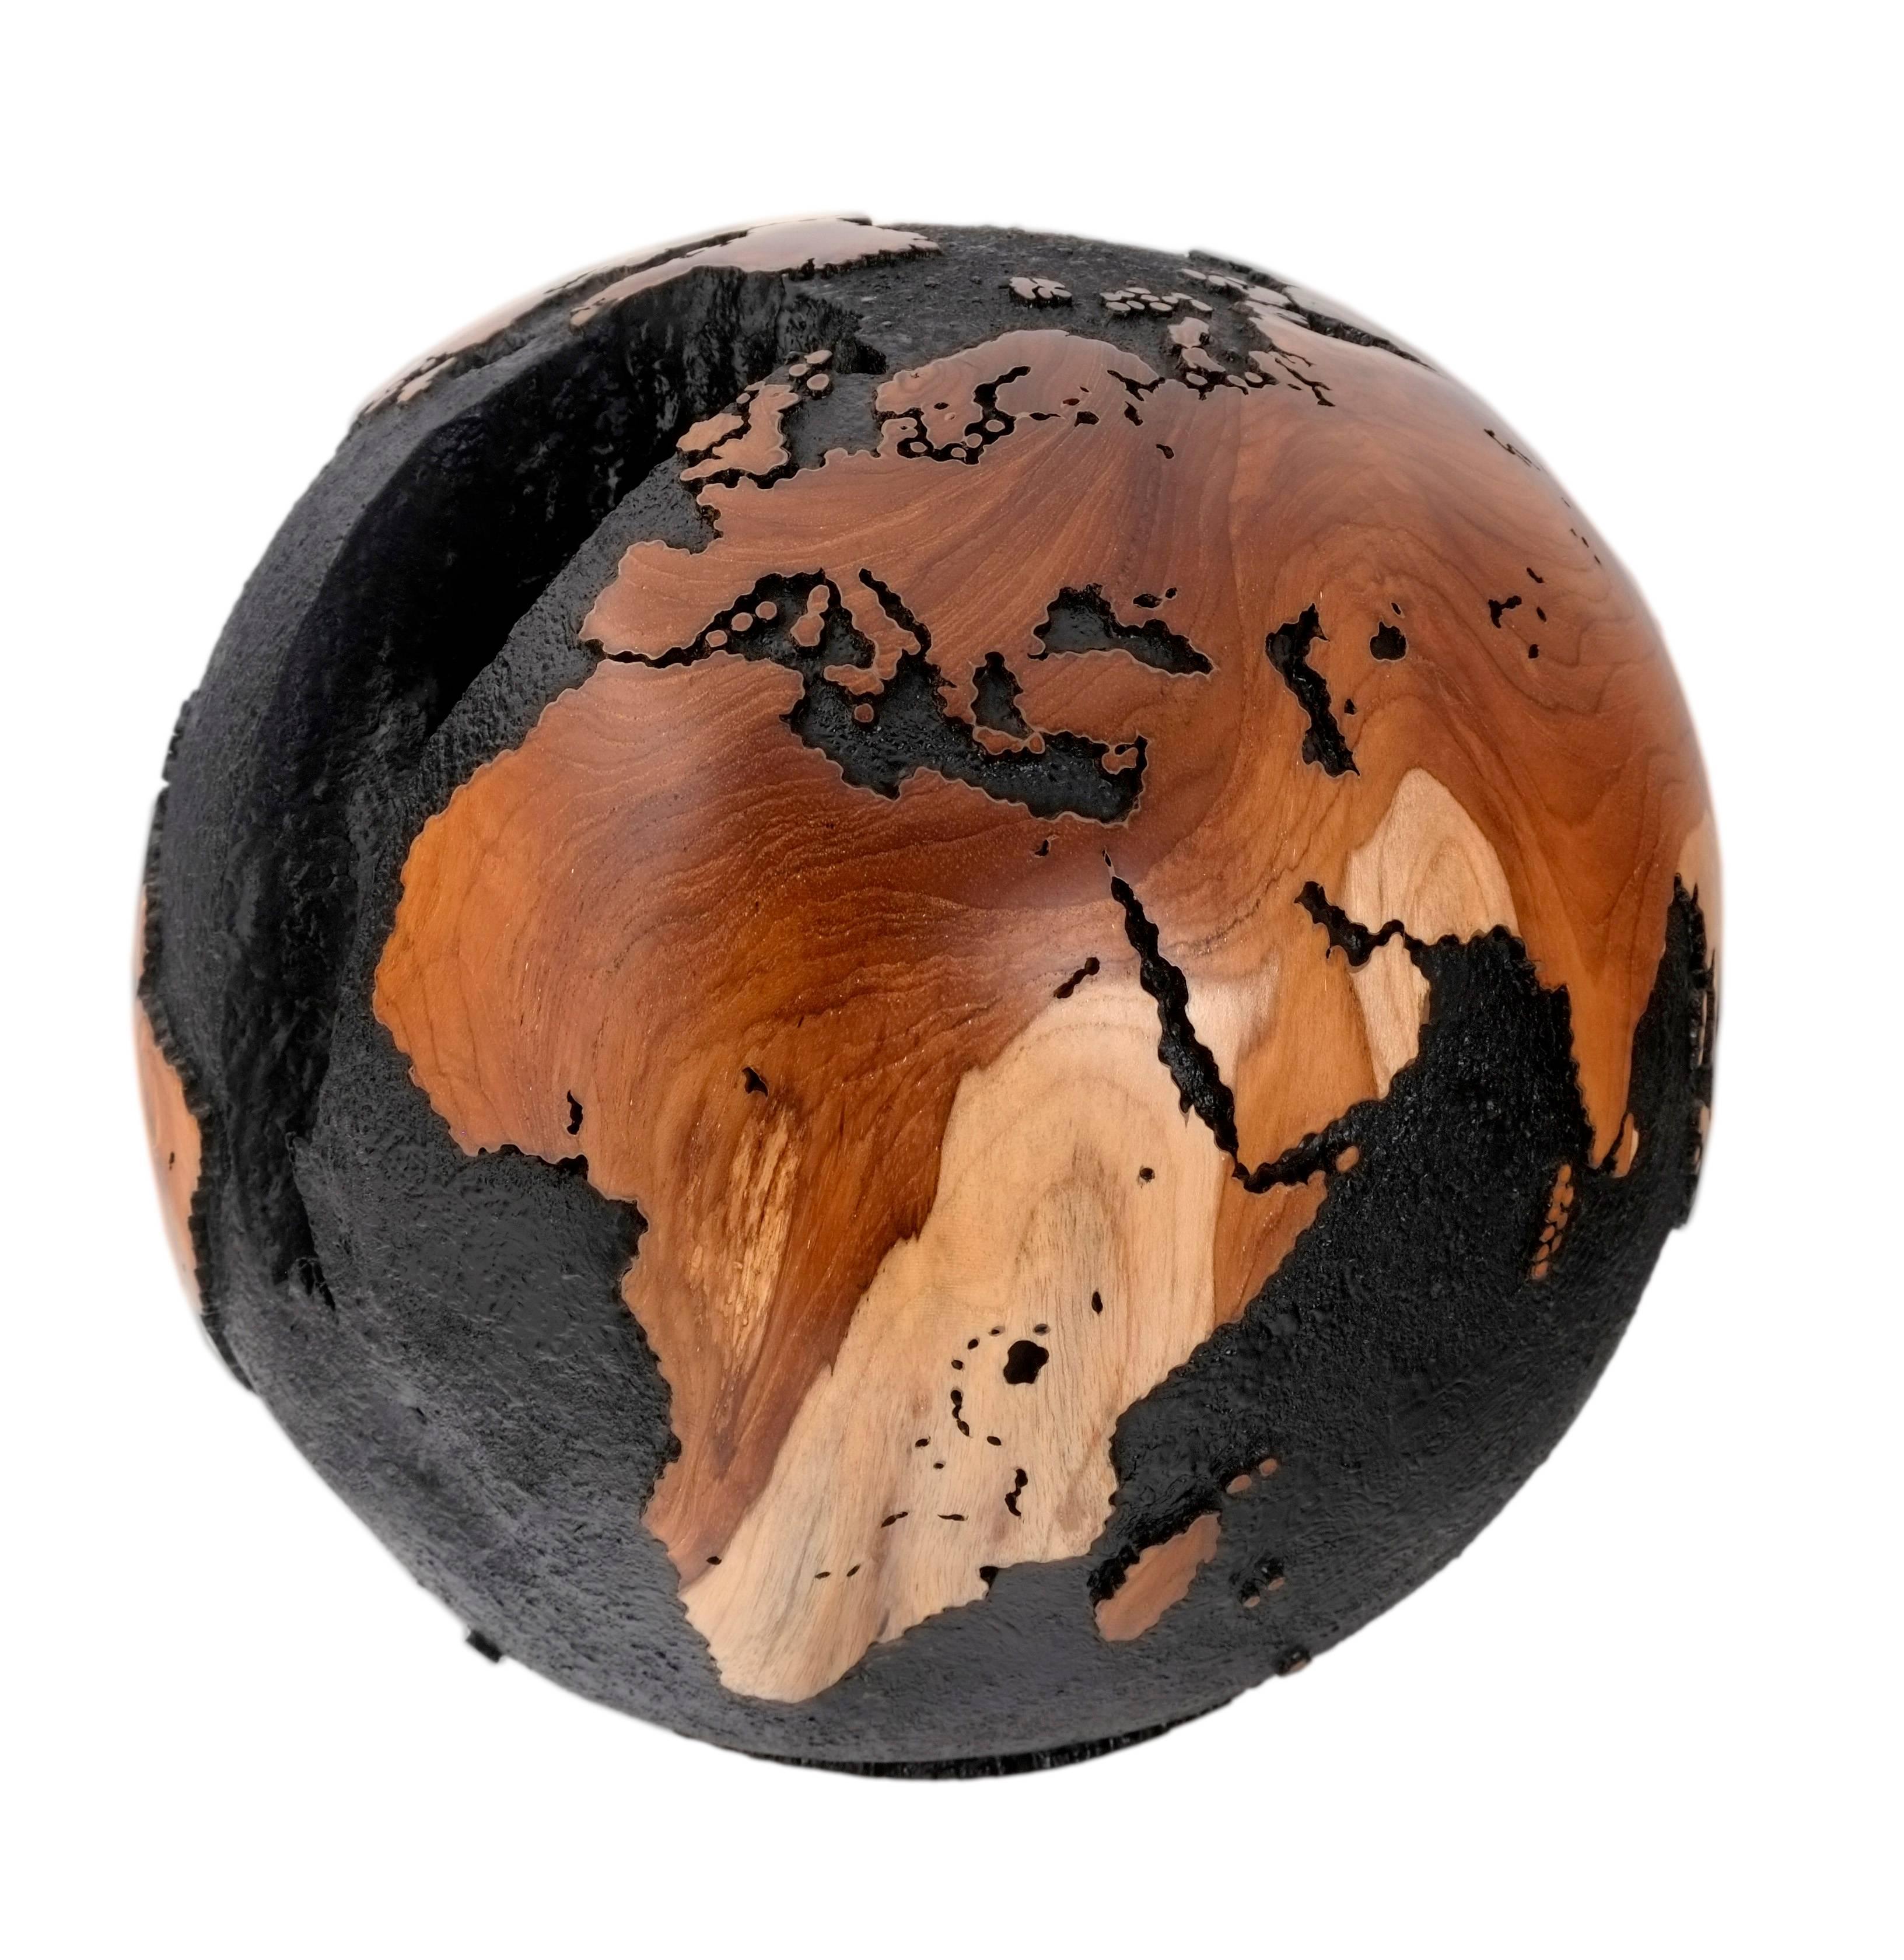 Don't bite at the bait of pleasure, till you know there's no hook beneath it.

Golden Hook Globe, is a hand-carved wooden globe with gold paint inlaid into a natural crevice of the teak root that resembles the shape of a hook that accents the